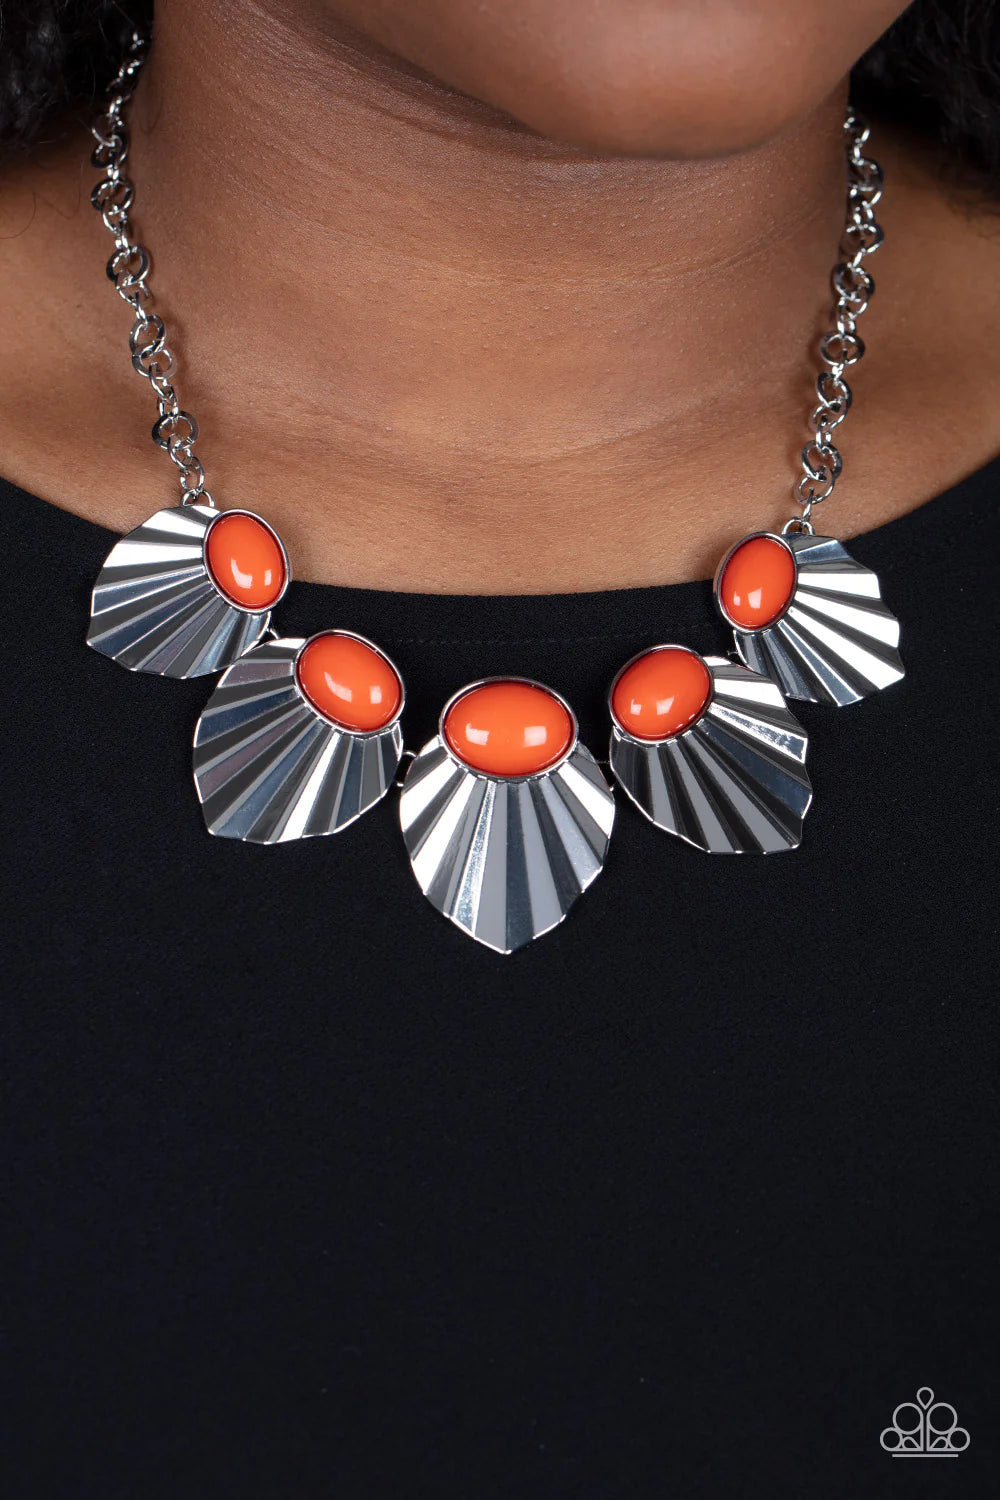 Paparazzi Accessories Fearlessly Ferocious - Orange Crowned in oval Burnt Orange beads, a collection of crimped and scalloped silver frames gradually increase in size as they fearlessly fan out below the collar for a ferocious fashion. Features an adjusta